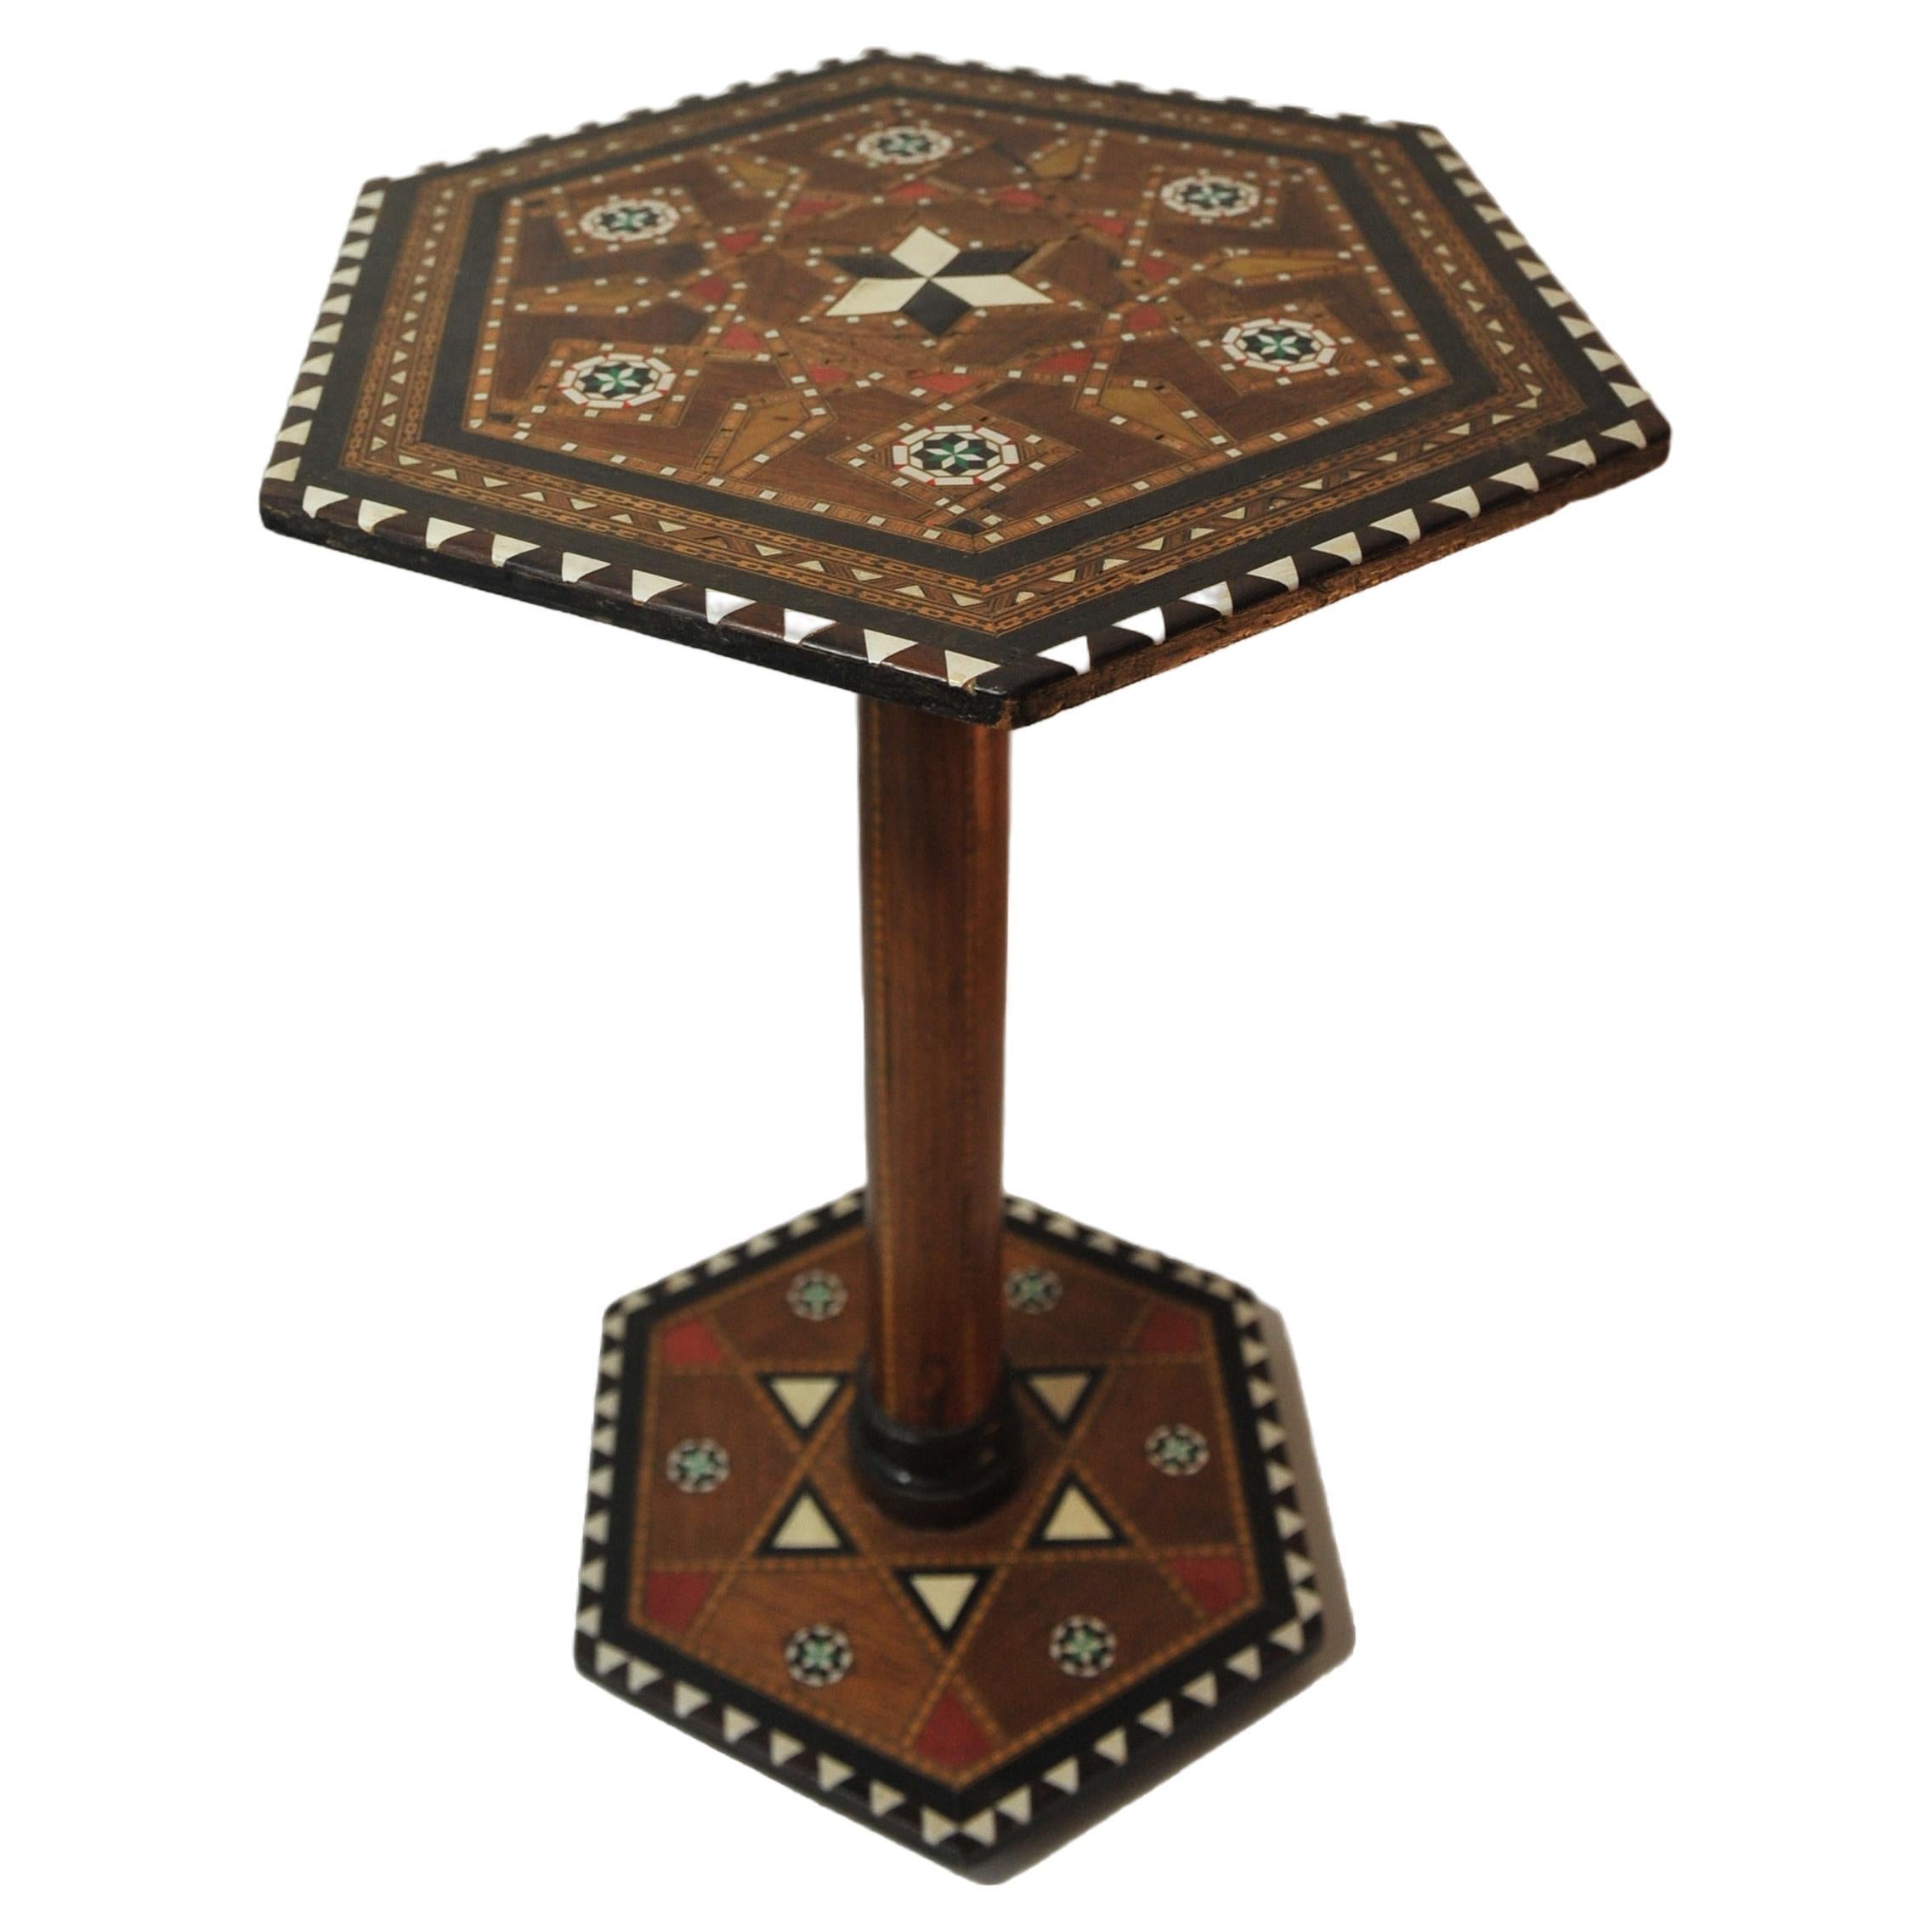 A 19th Century Hexagonal Damascene Fruitwood Tea Table With Mosaic Detailing  For Sale 2